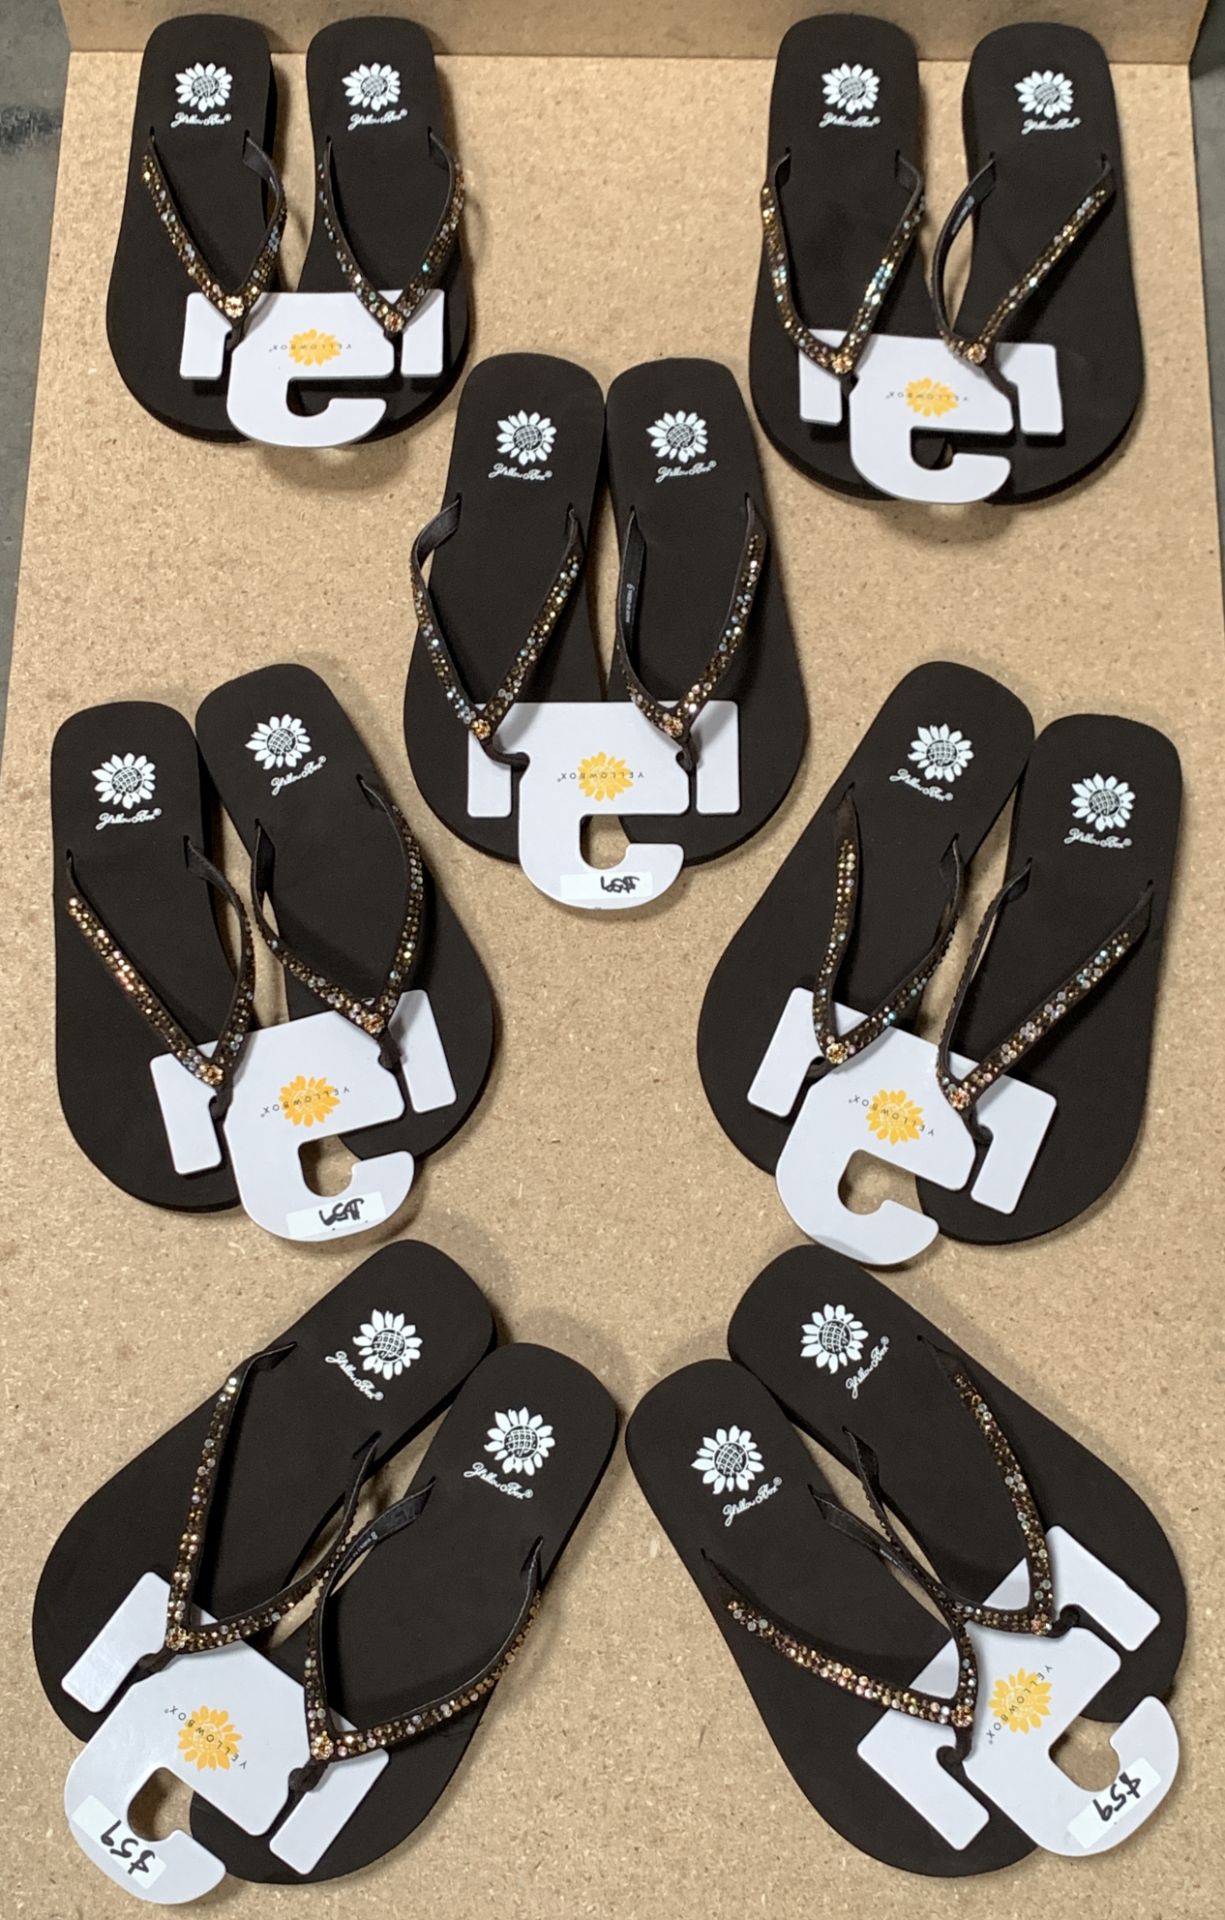 7 Pairs Yellow Box Flip Flop Sandals, Brown w. Crystals, New w. Tags, Various Sizes (Retail $413)